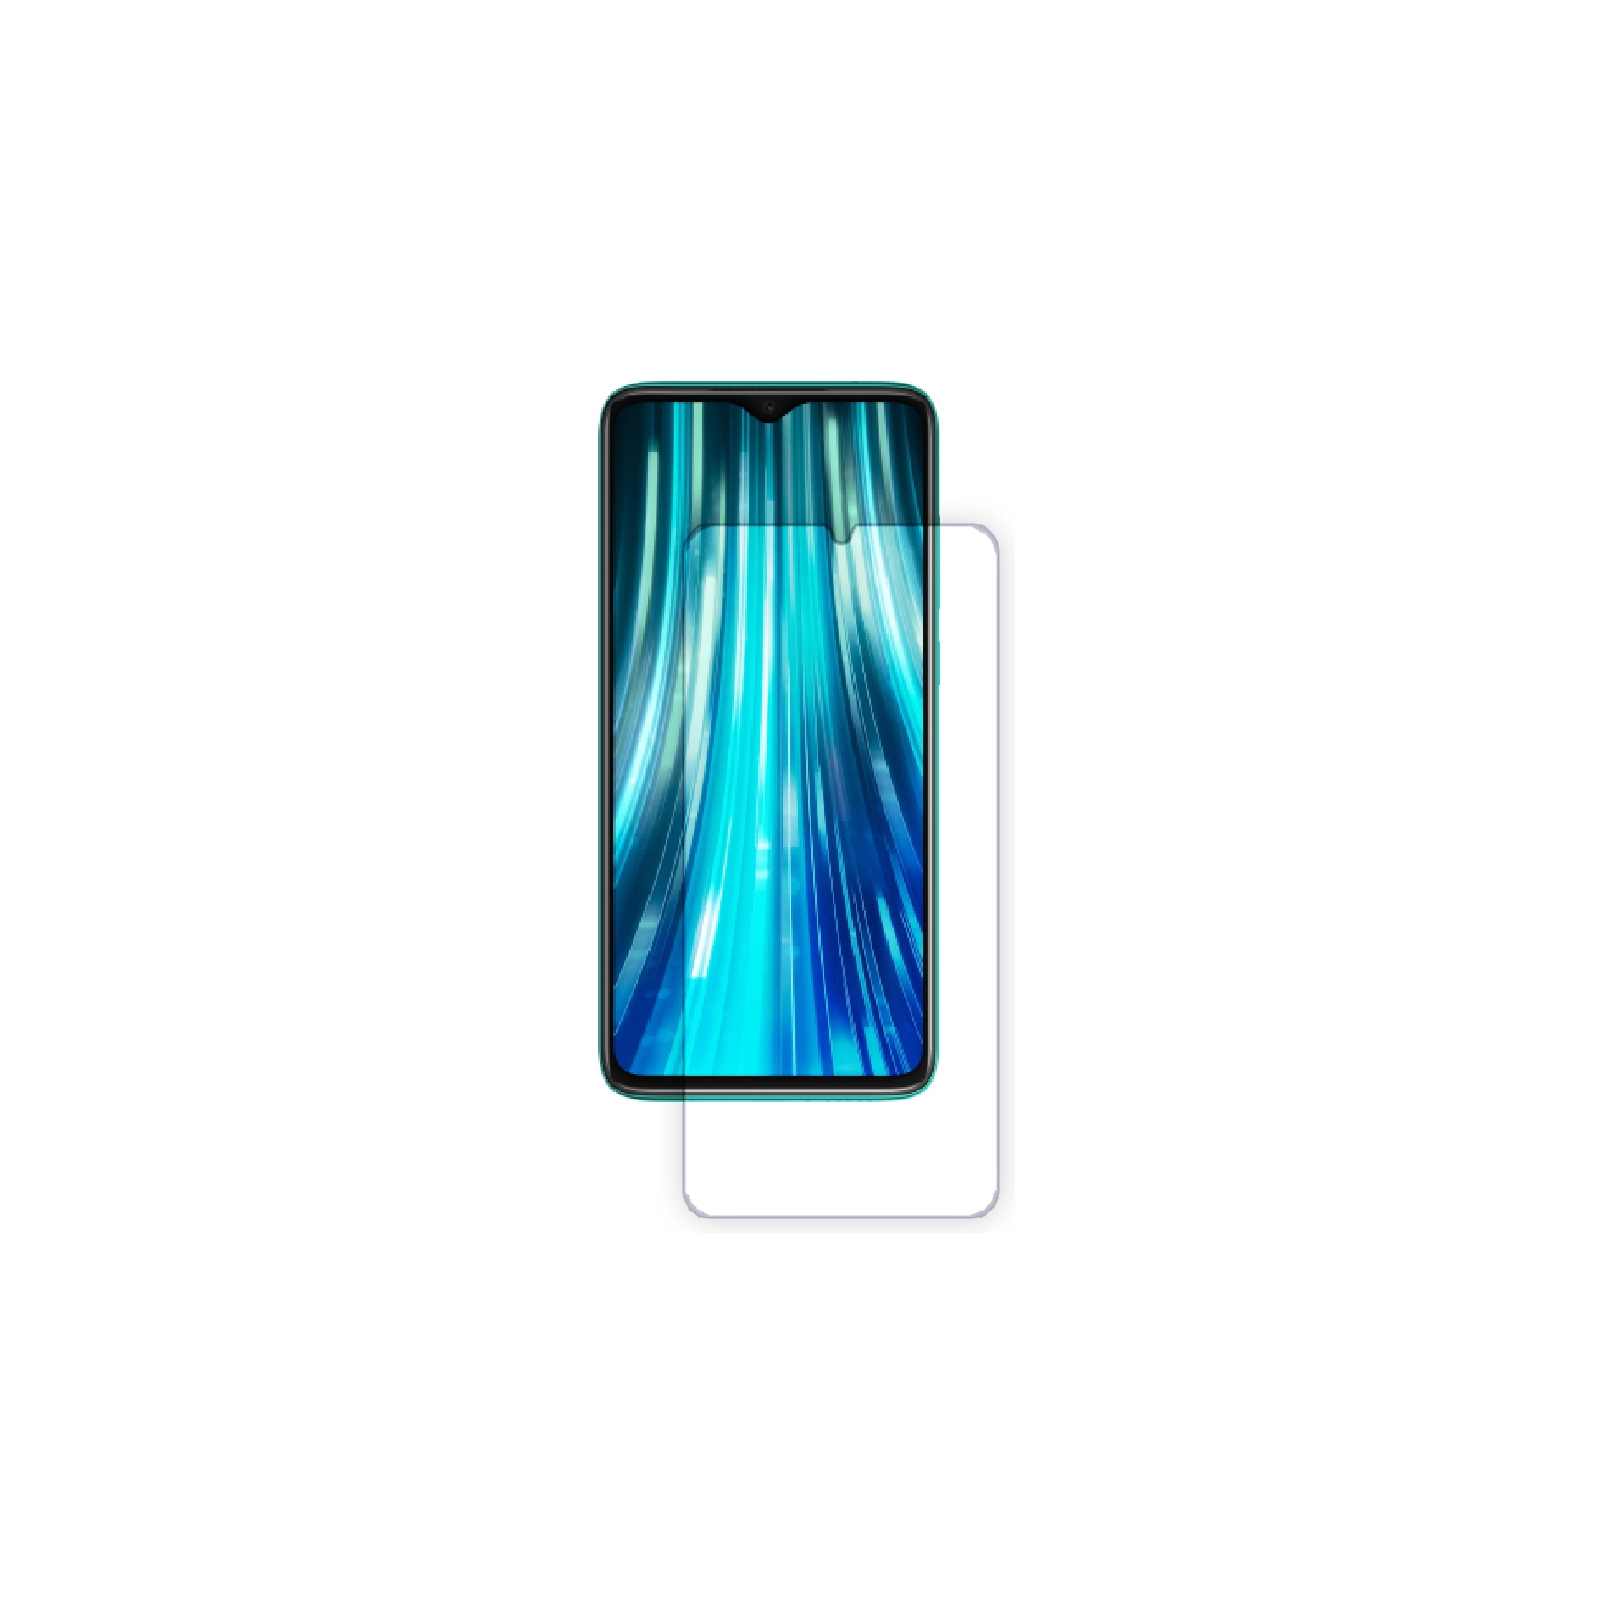 Скло захисне BeCover Xiaomi Redmi Note 8 Pro Crystal Clear Glass (704121)